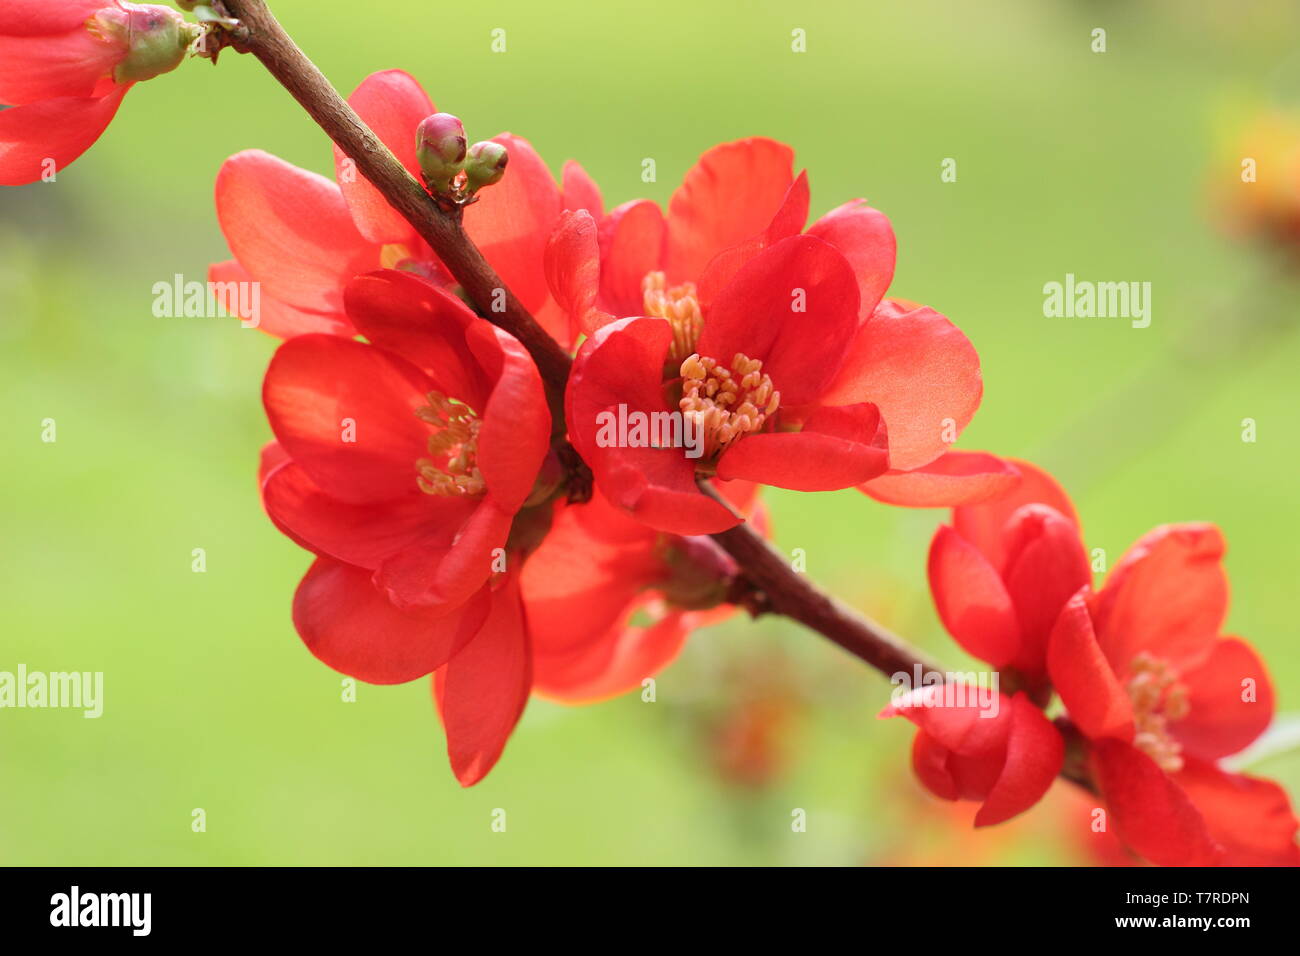 Chaenomeles superba 'Clementine'. Vibrant double blooms of Japanese quince 'Clementine' Stock Photo